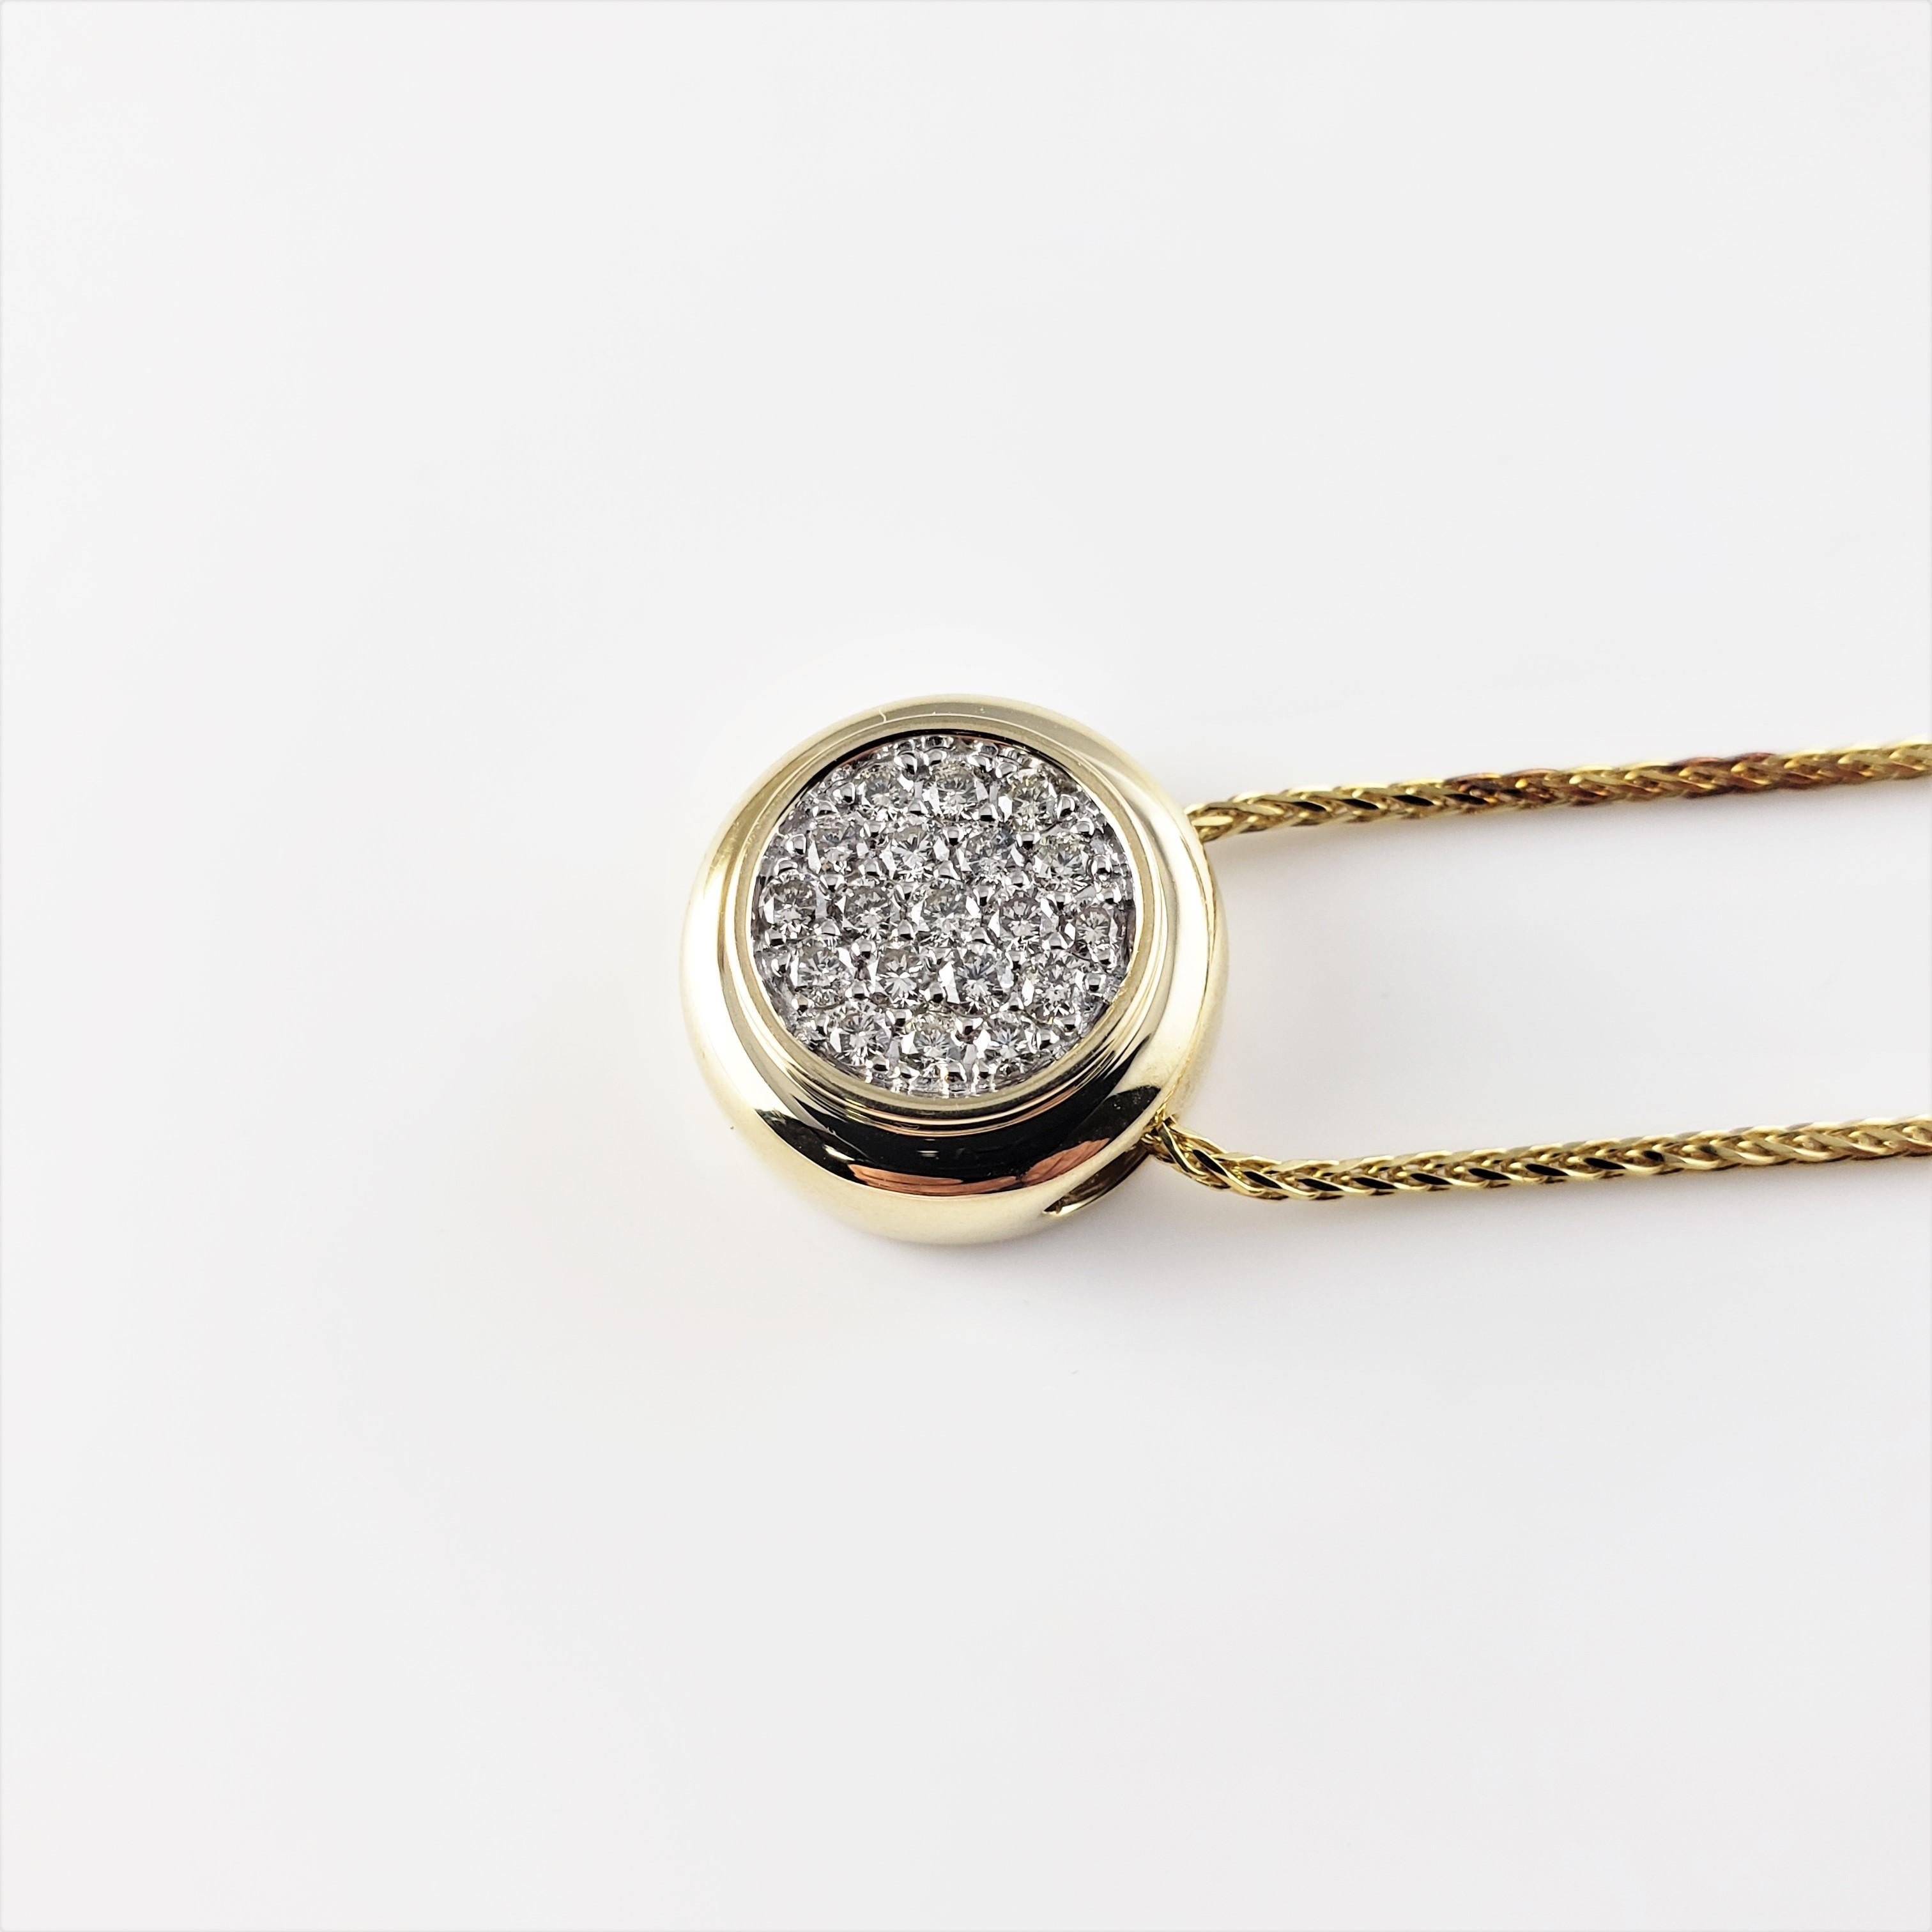 14 Karat Yellow Gold Diamond Pendant Necklace-

This sparkling slide pendant features 19 round brilliant cut diamonds set in classic 14K white gold. Elegant 14K yellow gold wheat chain included.

Approximate total diamond weight:  .50 ct.

Diamond